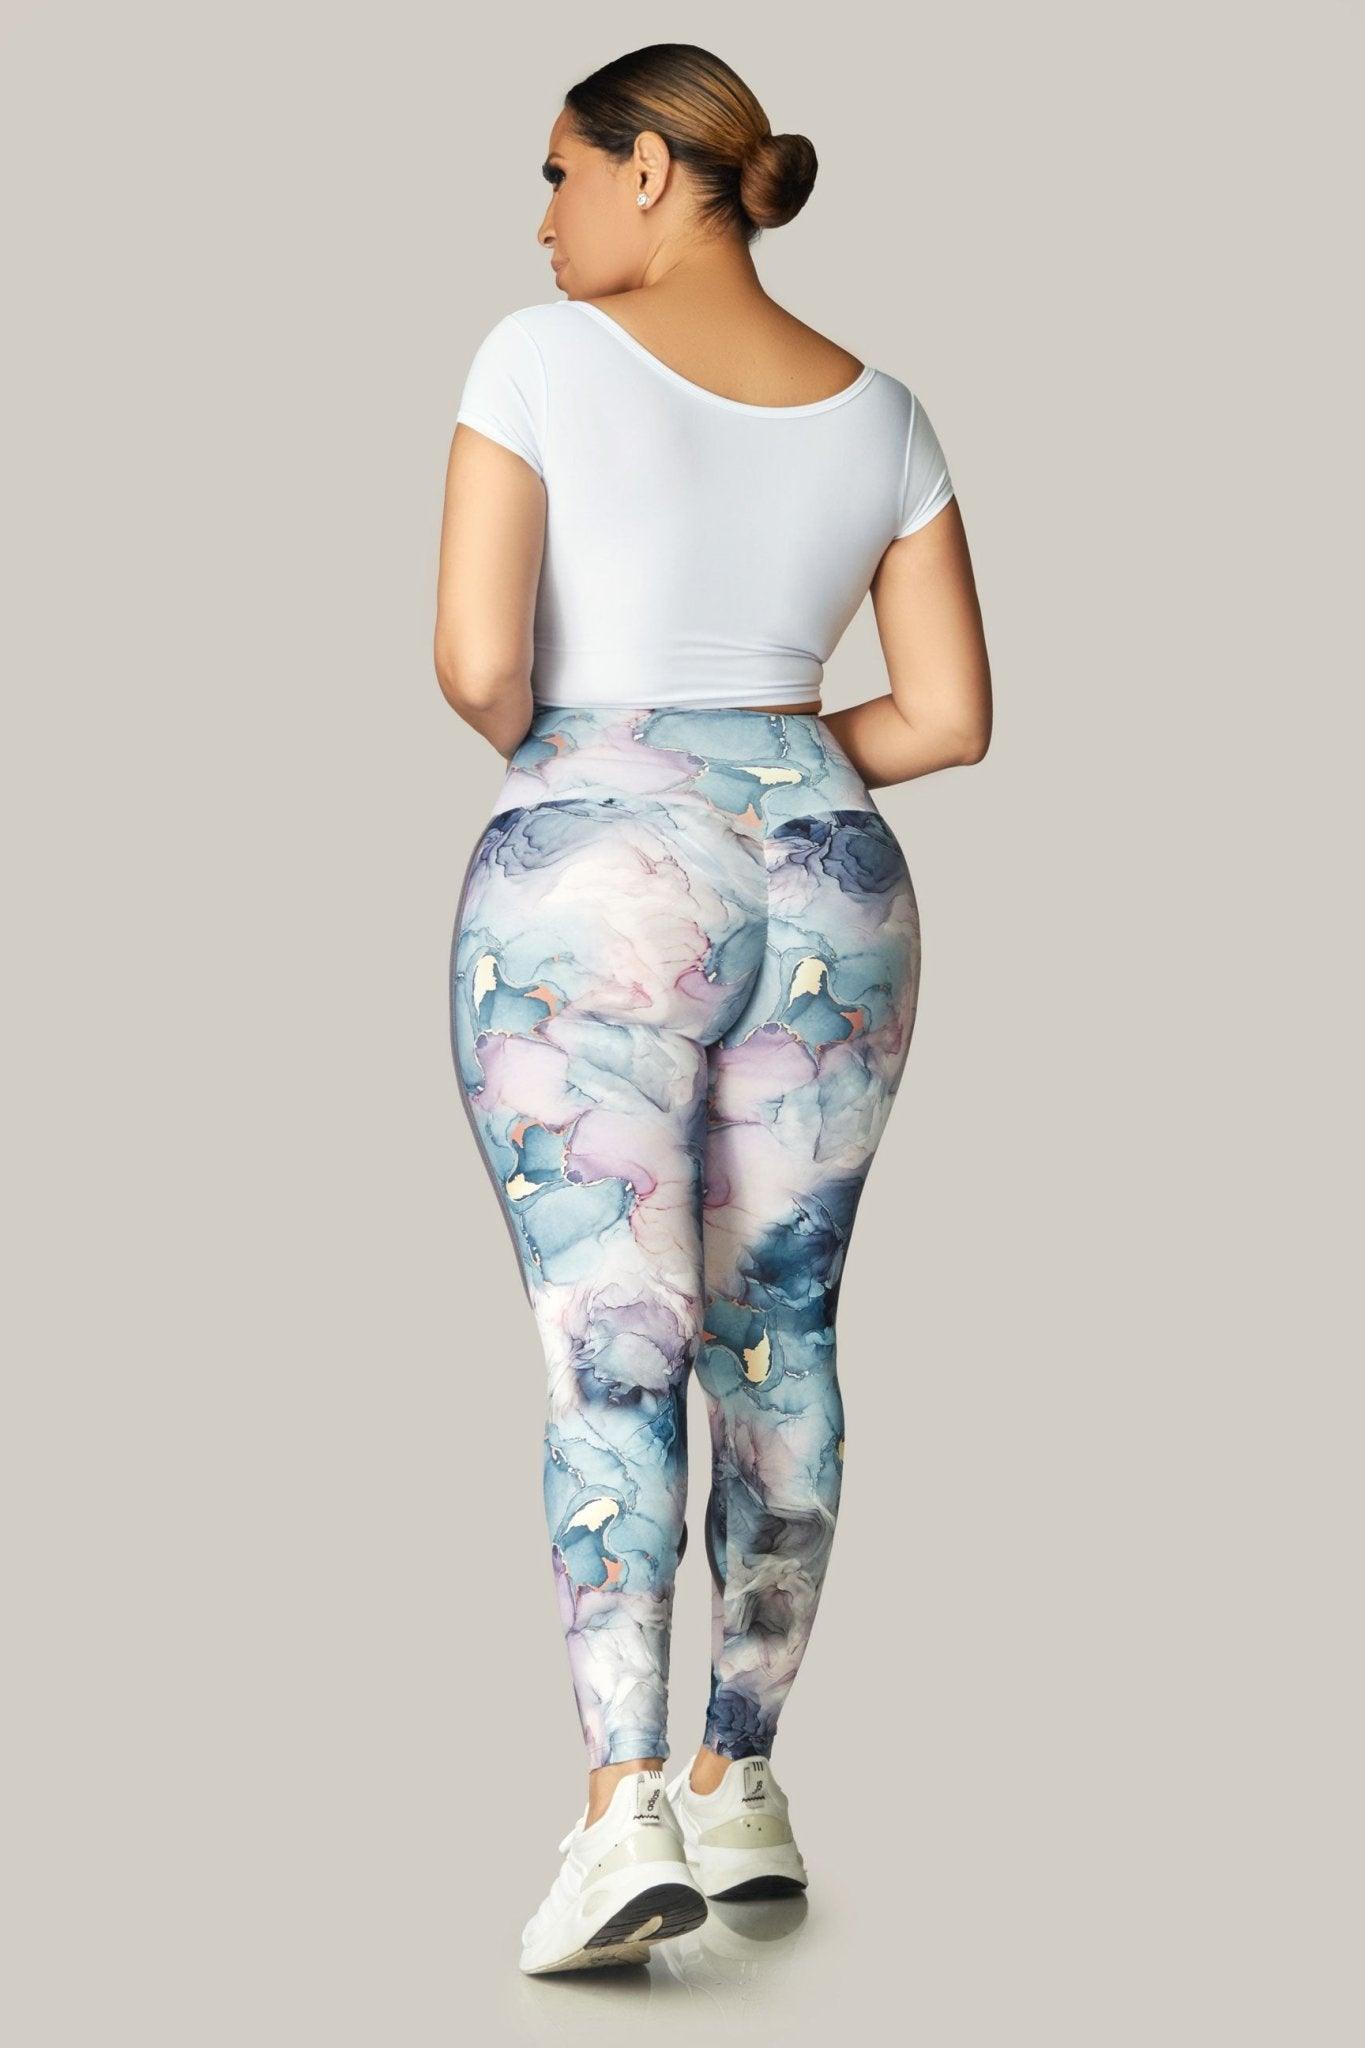 Archer High-Waisted Leggings and Sport Bra Set - MY SEXY STYLES